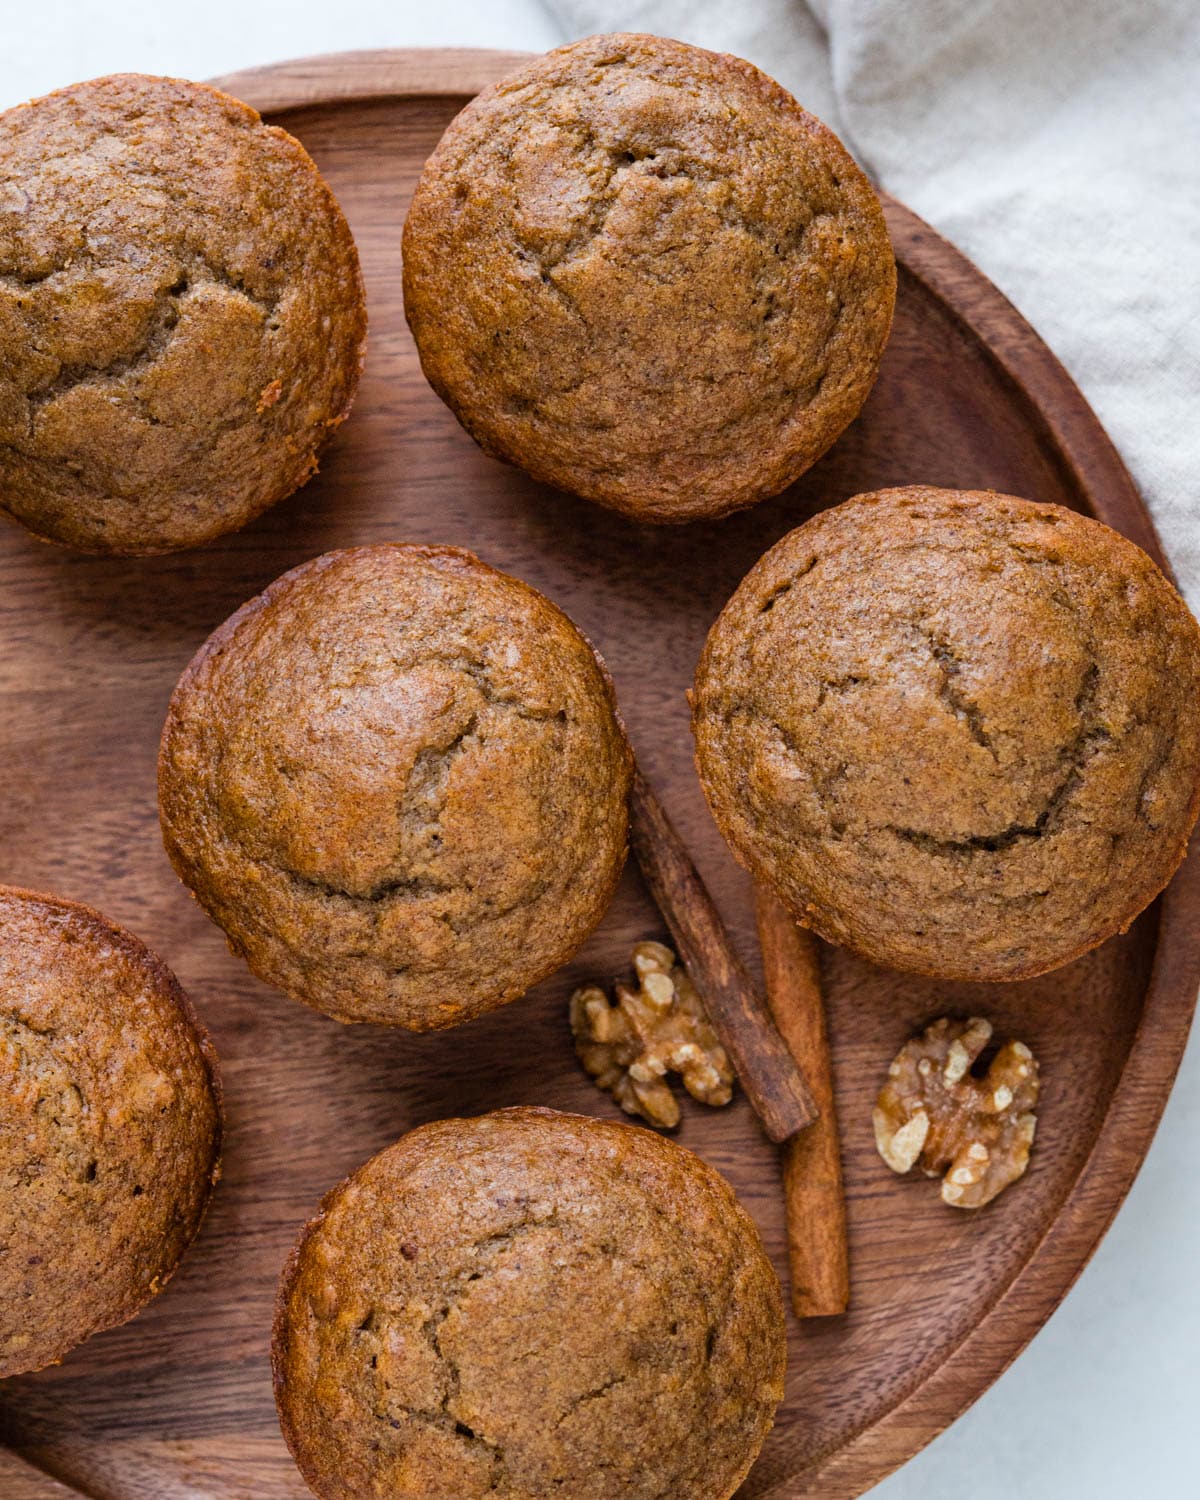 We are serving applesauce muffins on a wooden serving board.